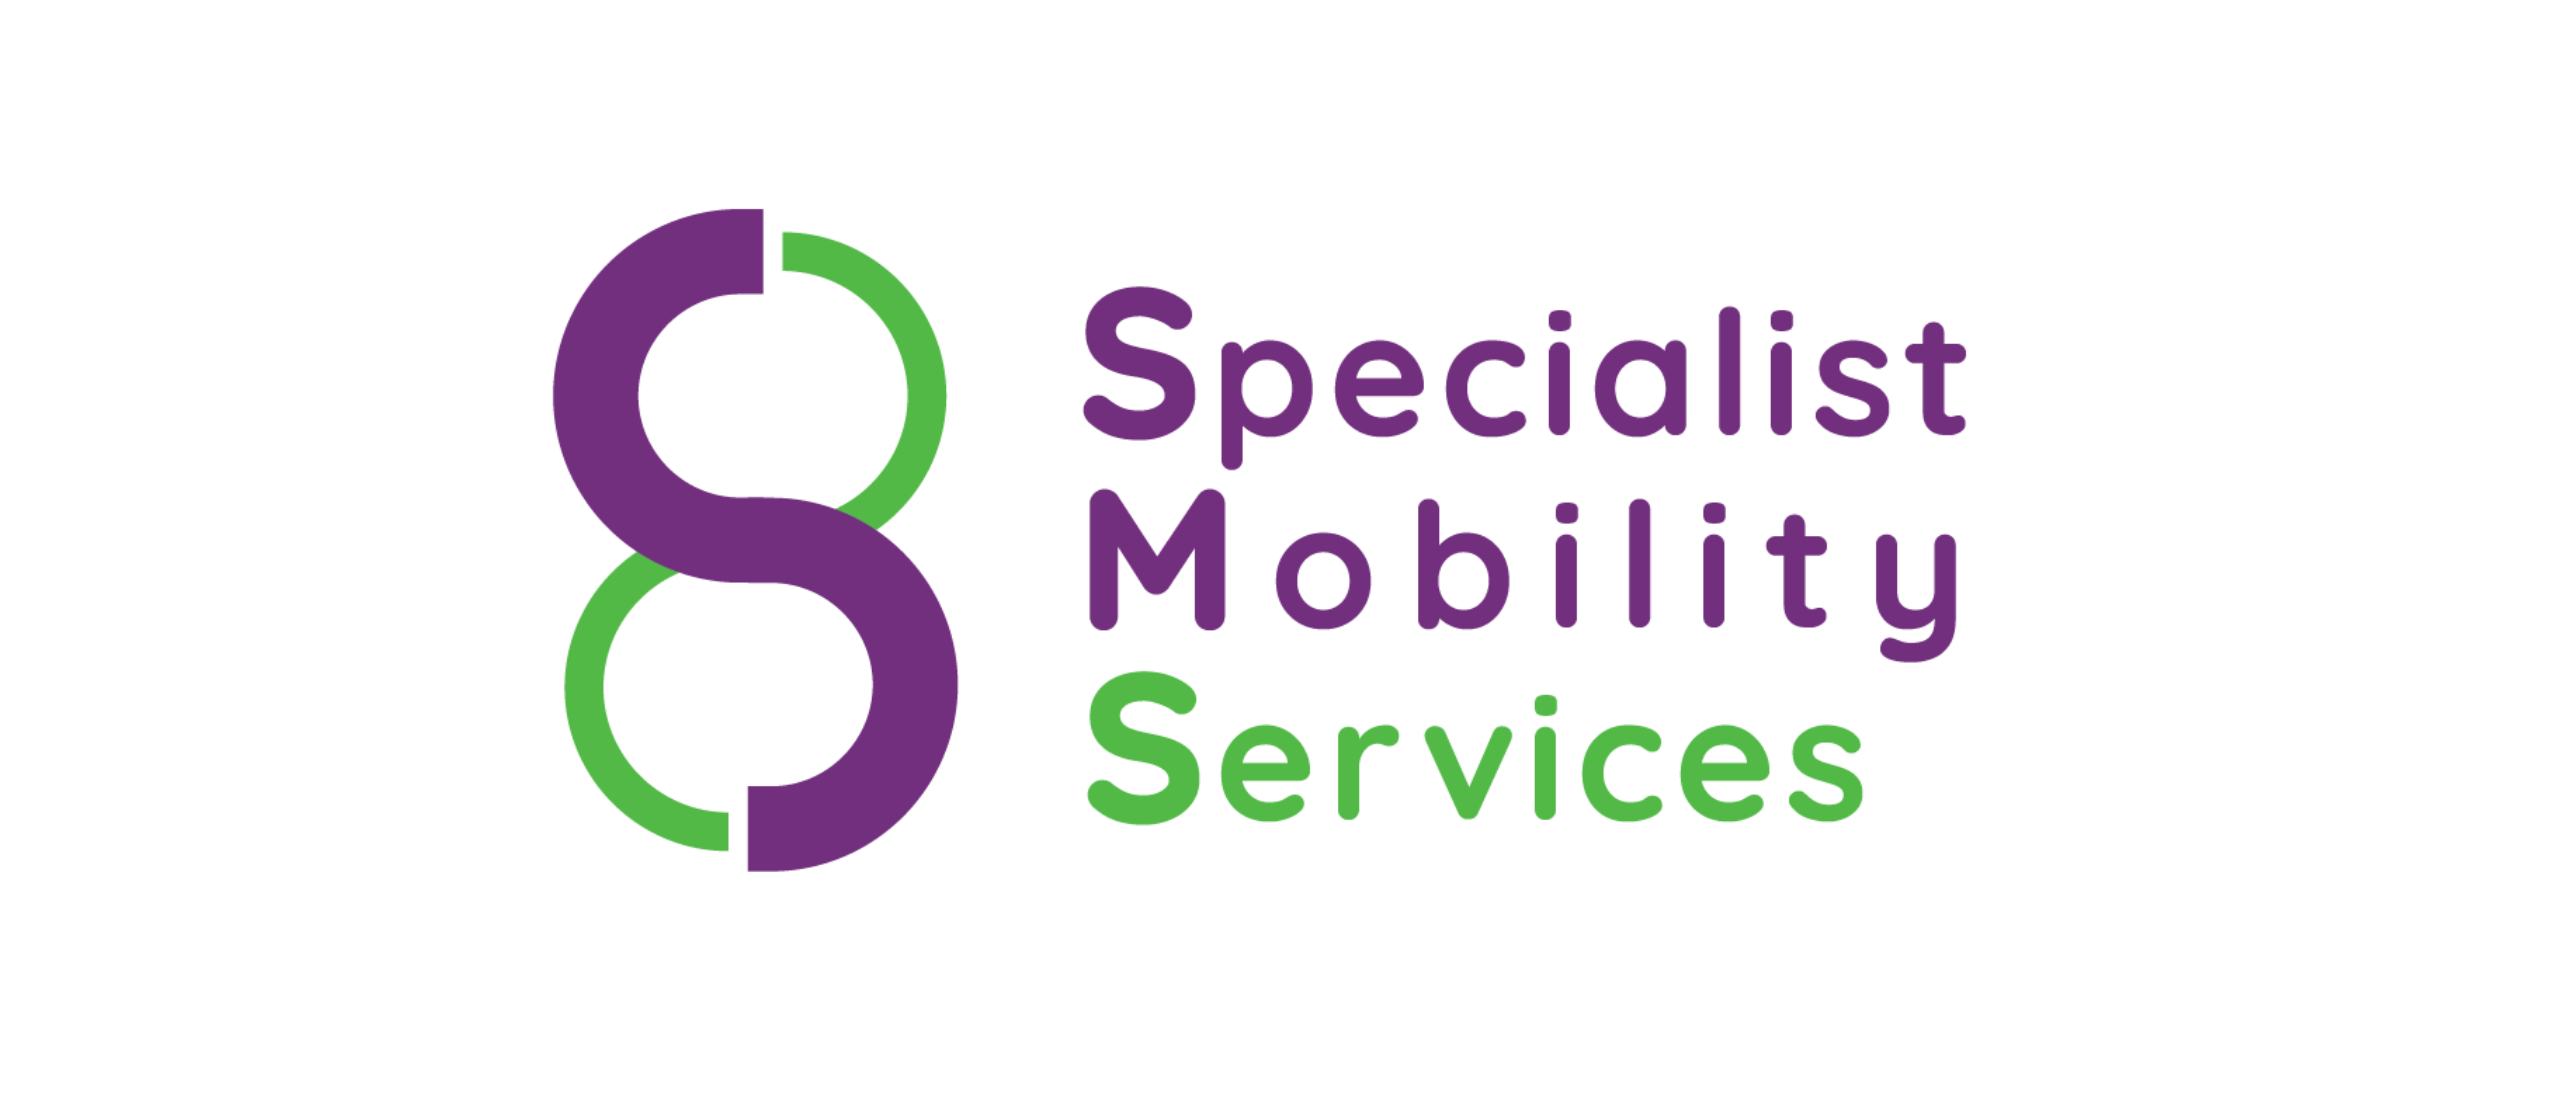 Specialist Mobility Services